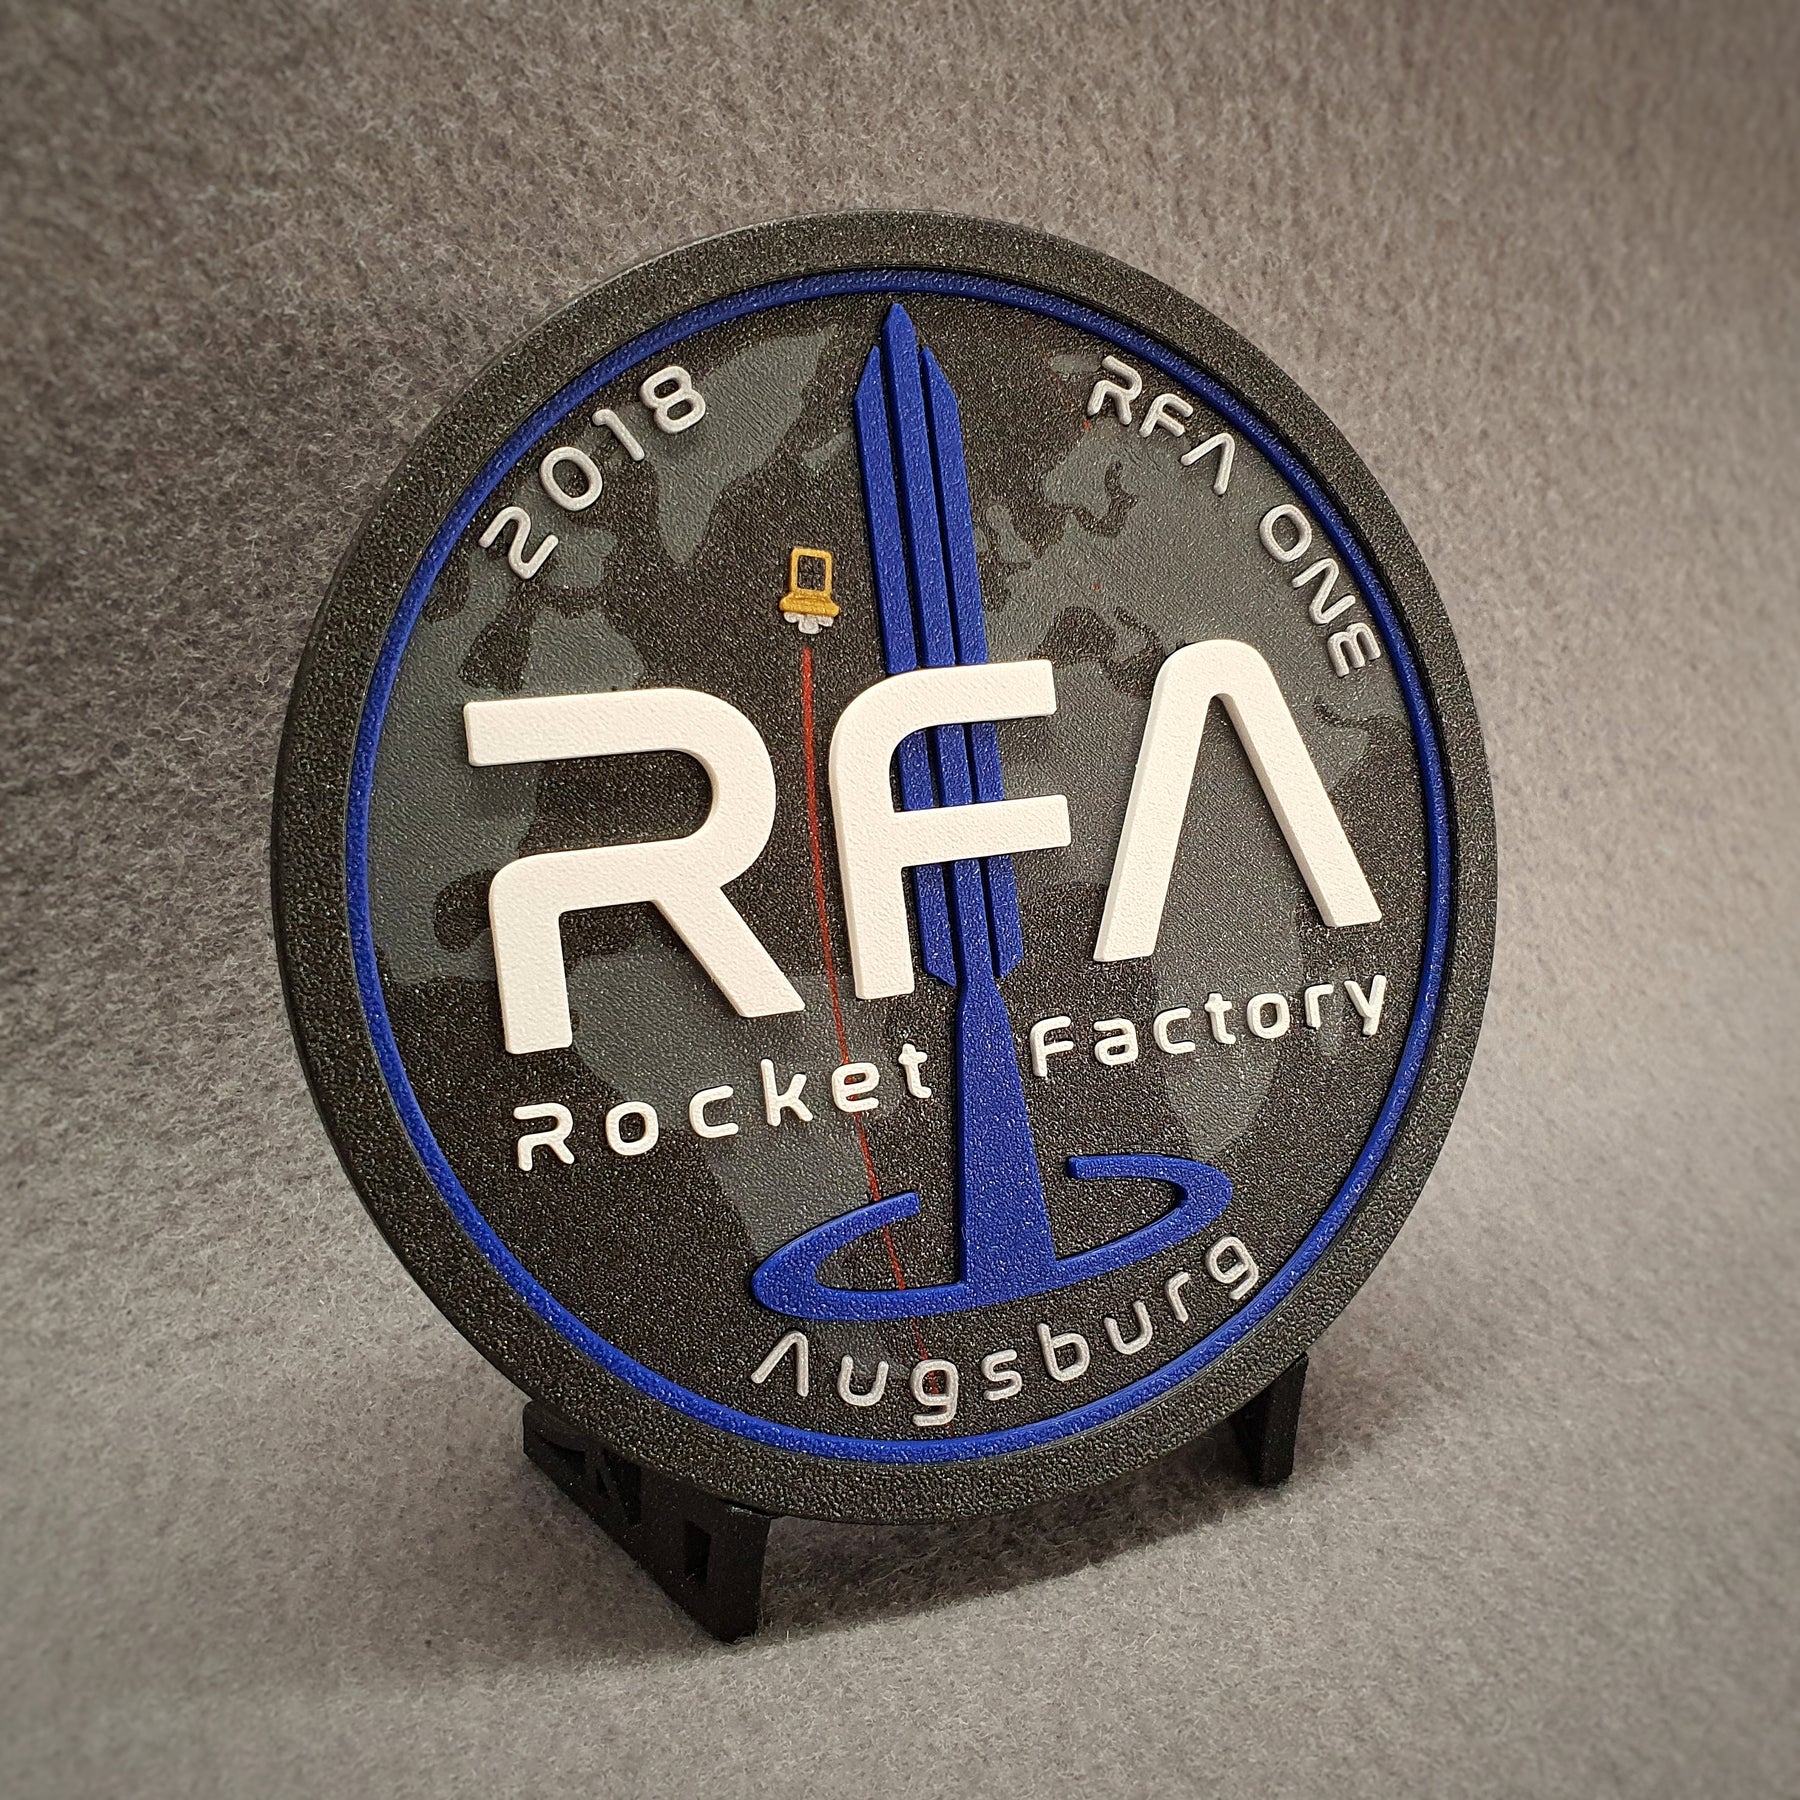 Rocket Factory Augsburg - Official 3D printed patch